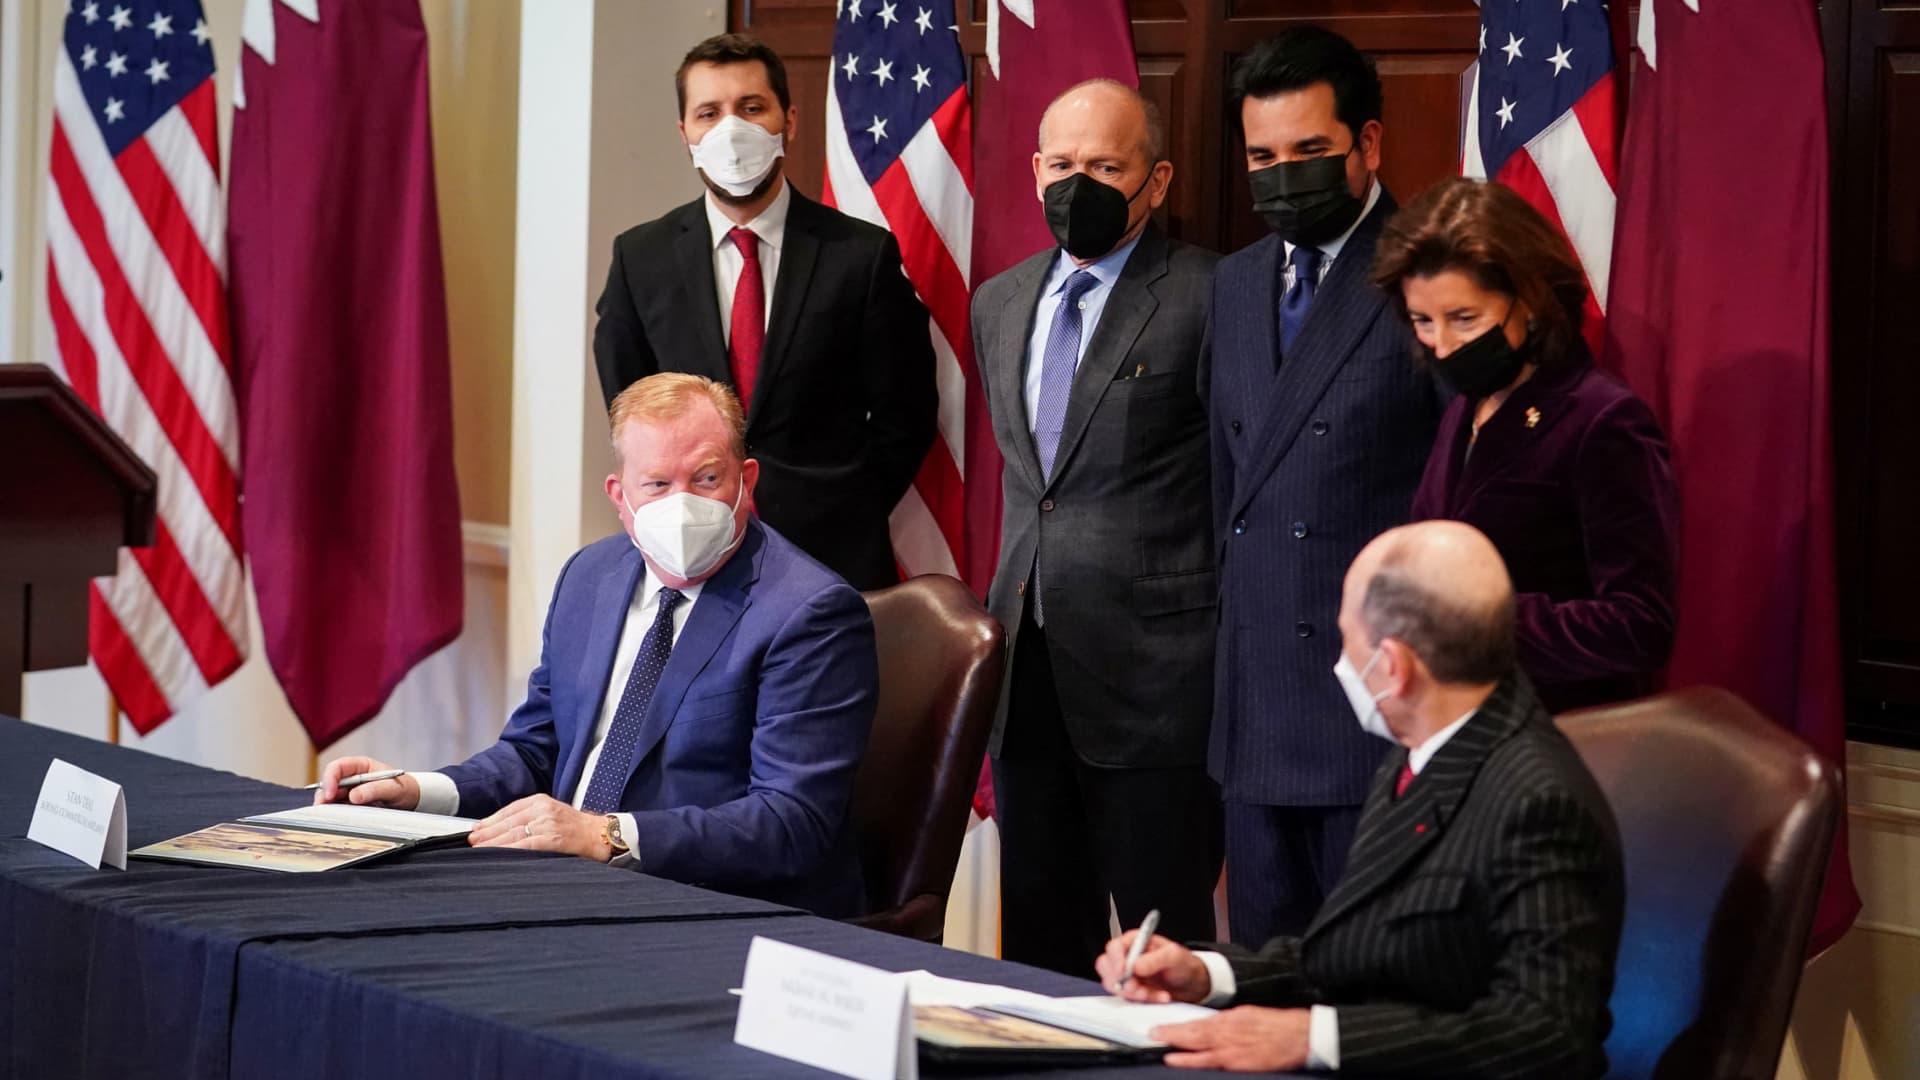 Boeing Commercial Airplanes President and CEO Stan Deal and Qatar Airlines CEO Akbar Al Baker participate in a signing ceremony of an agreement for the purchase of 777-8 Freighter planes at the Eisenhower Executive Office Building near the White House in Washington, January 31, 2022.